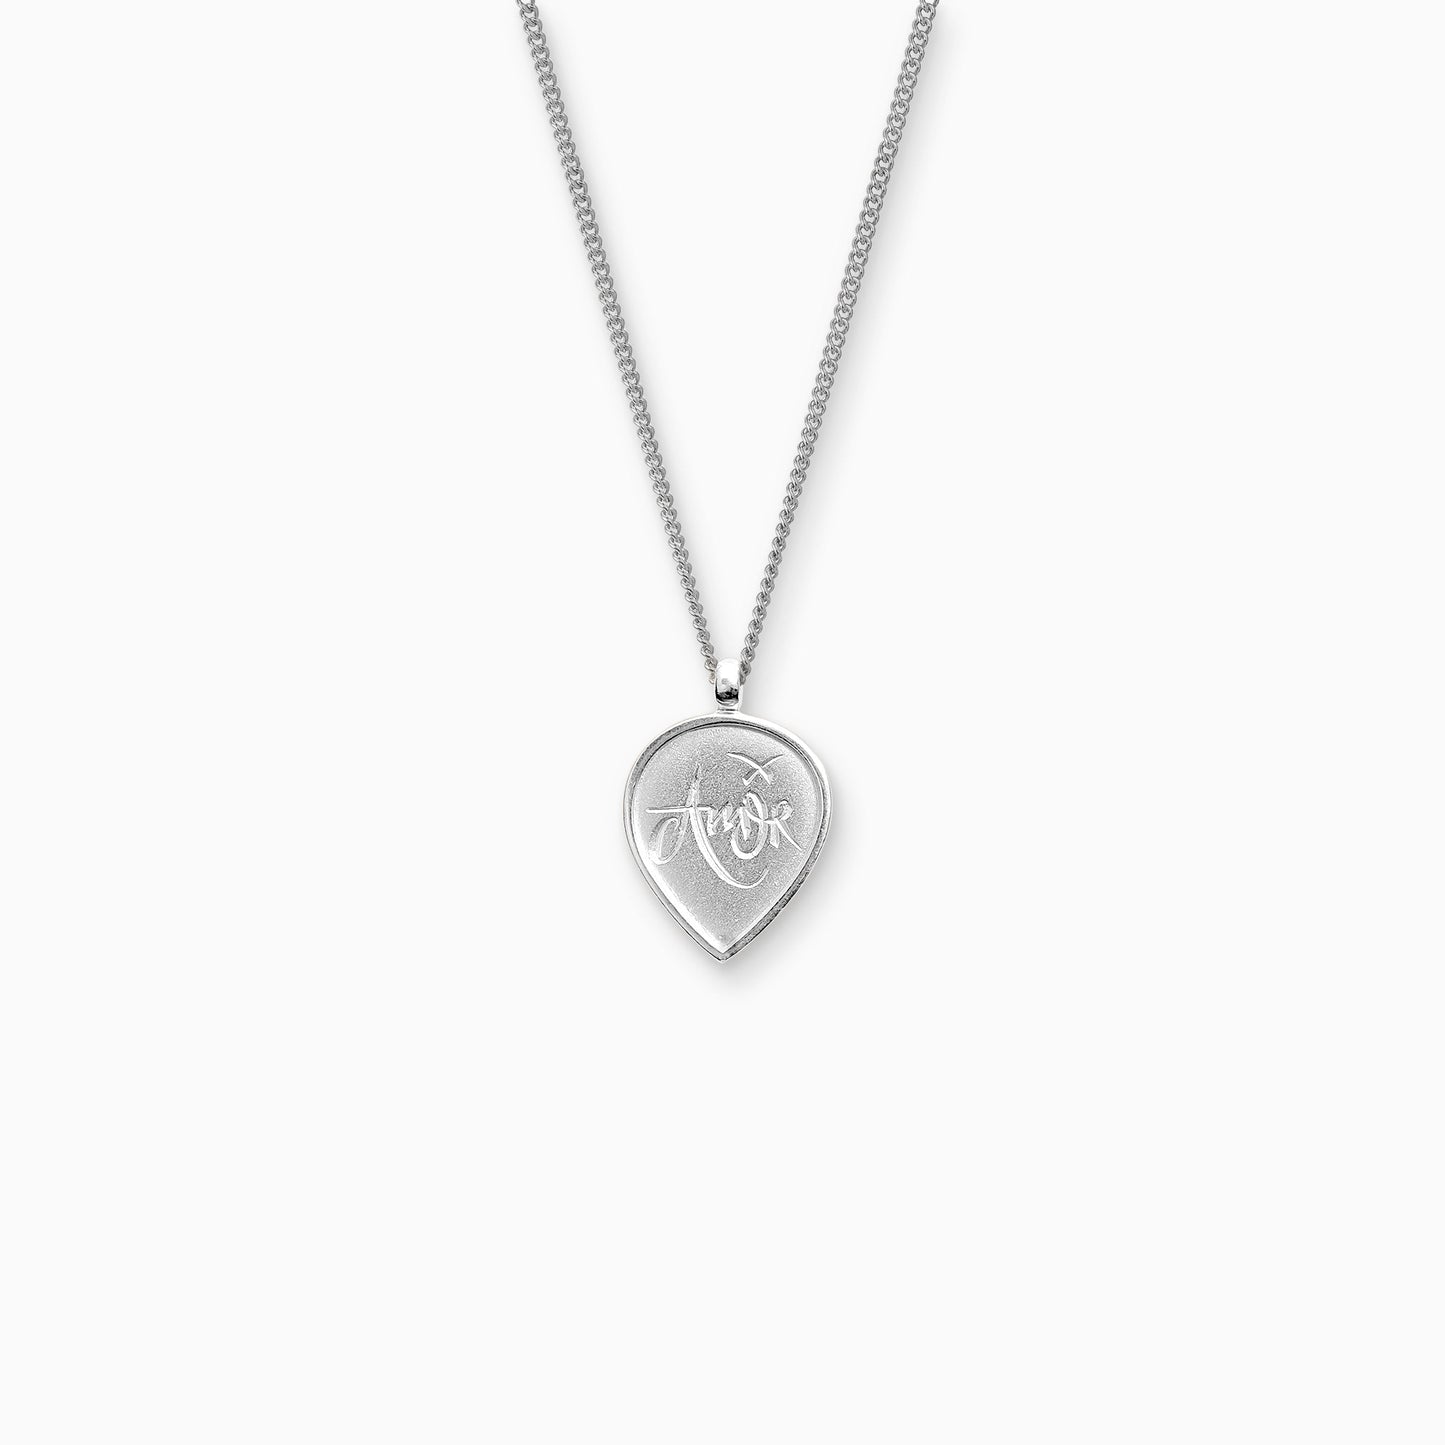 Recycled Silver teardrop shaped pendant, 25cm x 16mm on a 45cm fine curb chain.  Amor, the Latin for Love is inscribed in a handwritten script on the front of the pendant.